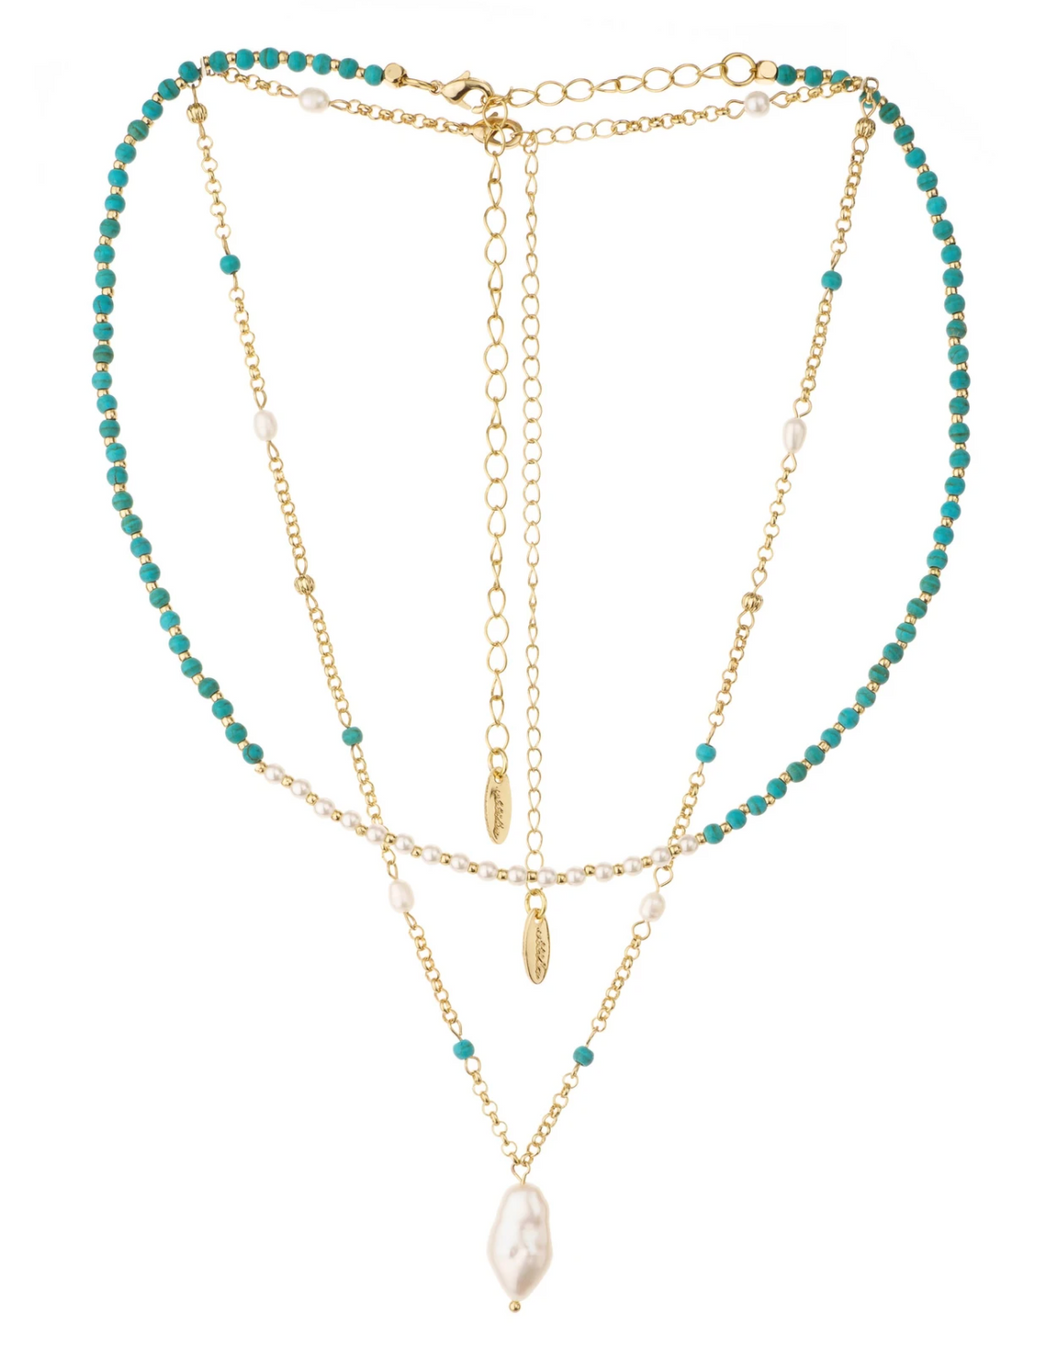 Single Strand Turquoise and Pearl Pendant Necklace Set in Gold